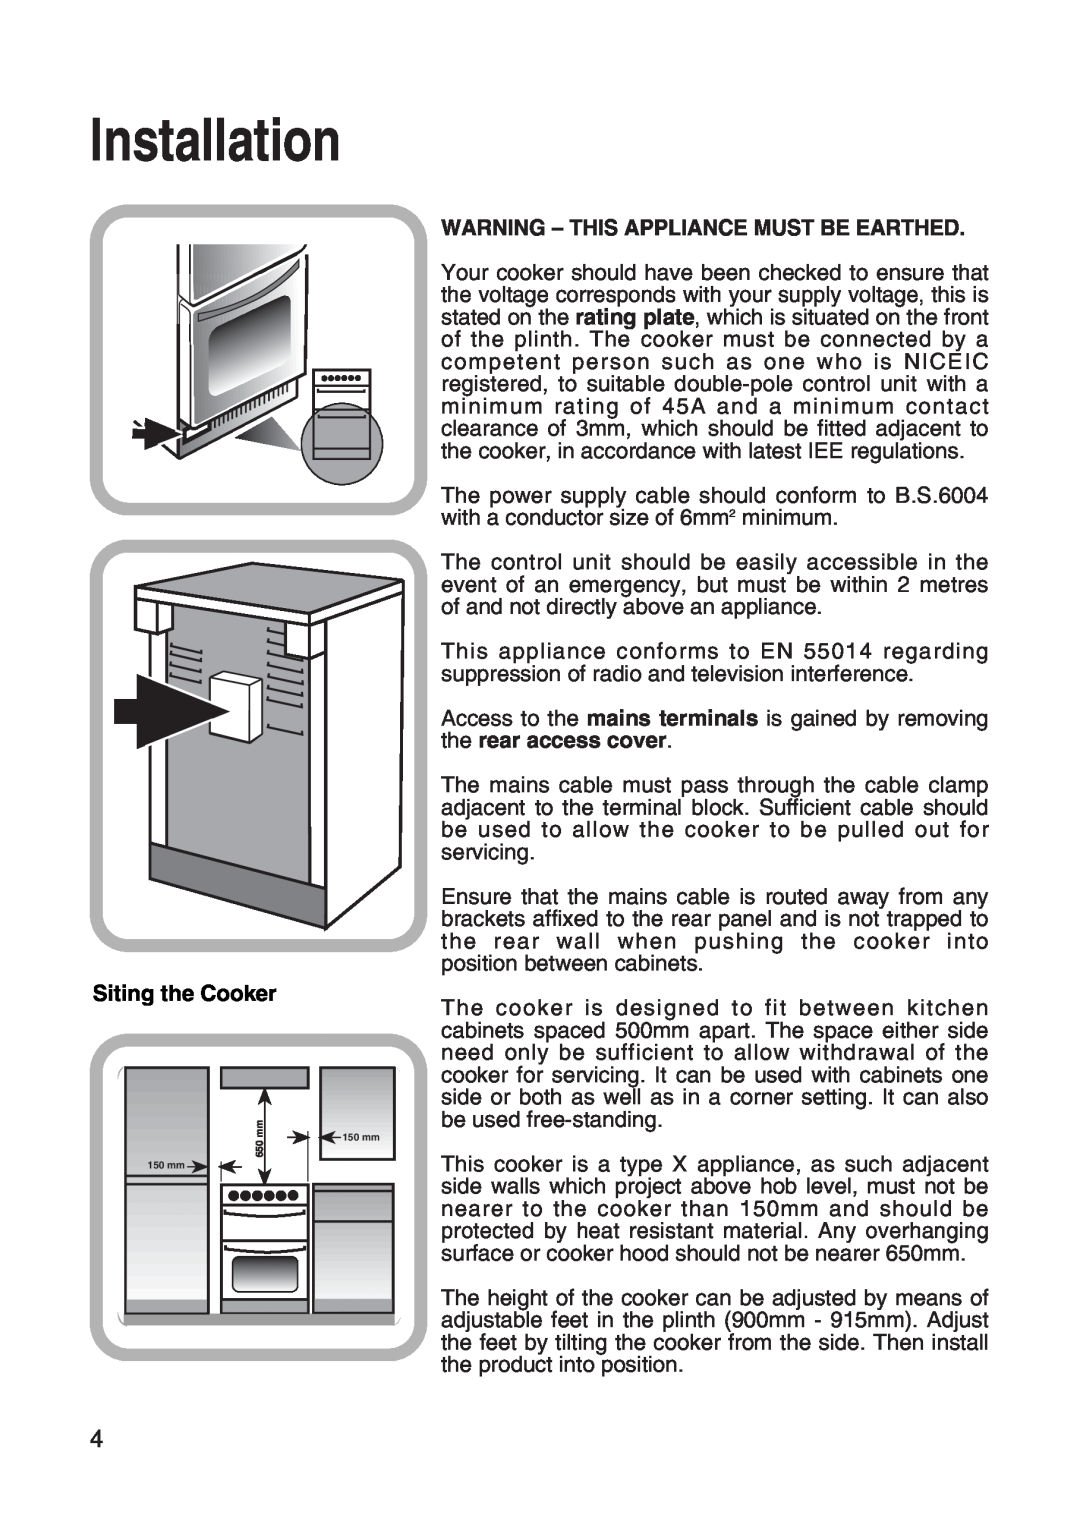 Hotpoint EW31 installation instructions Installation, Siting the Cooker, Warning - This Appliance Must Be Earthed 